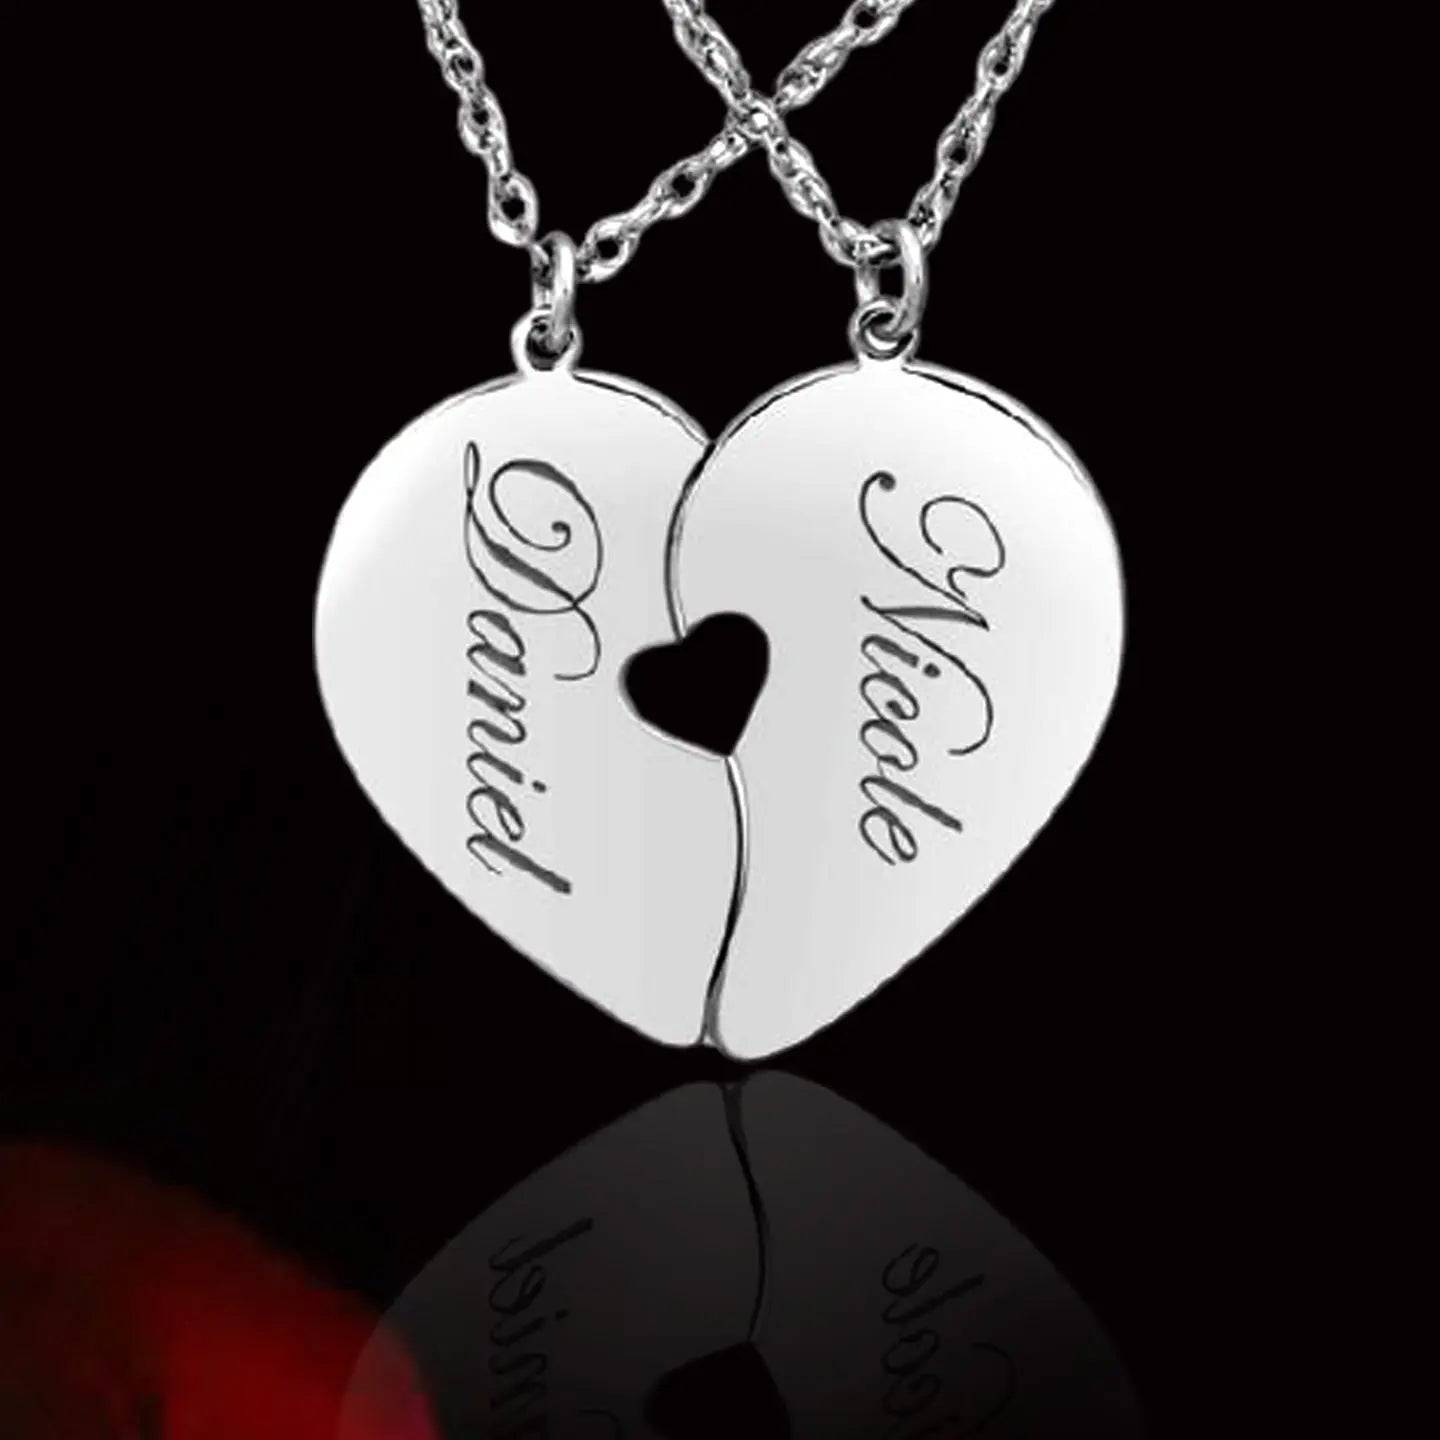 Personalized Heart Necklace Set - 925 Sterling Silver, Custom Engraved Couple Gifts - Baza Boutique 